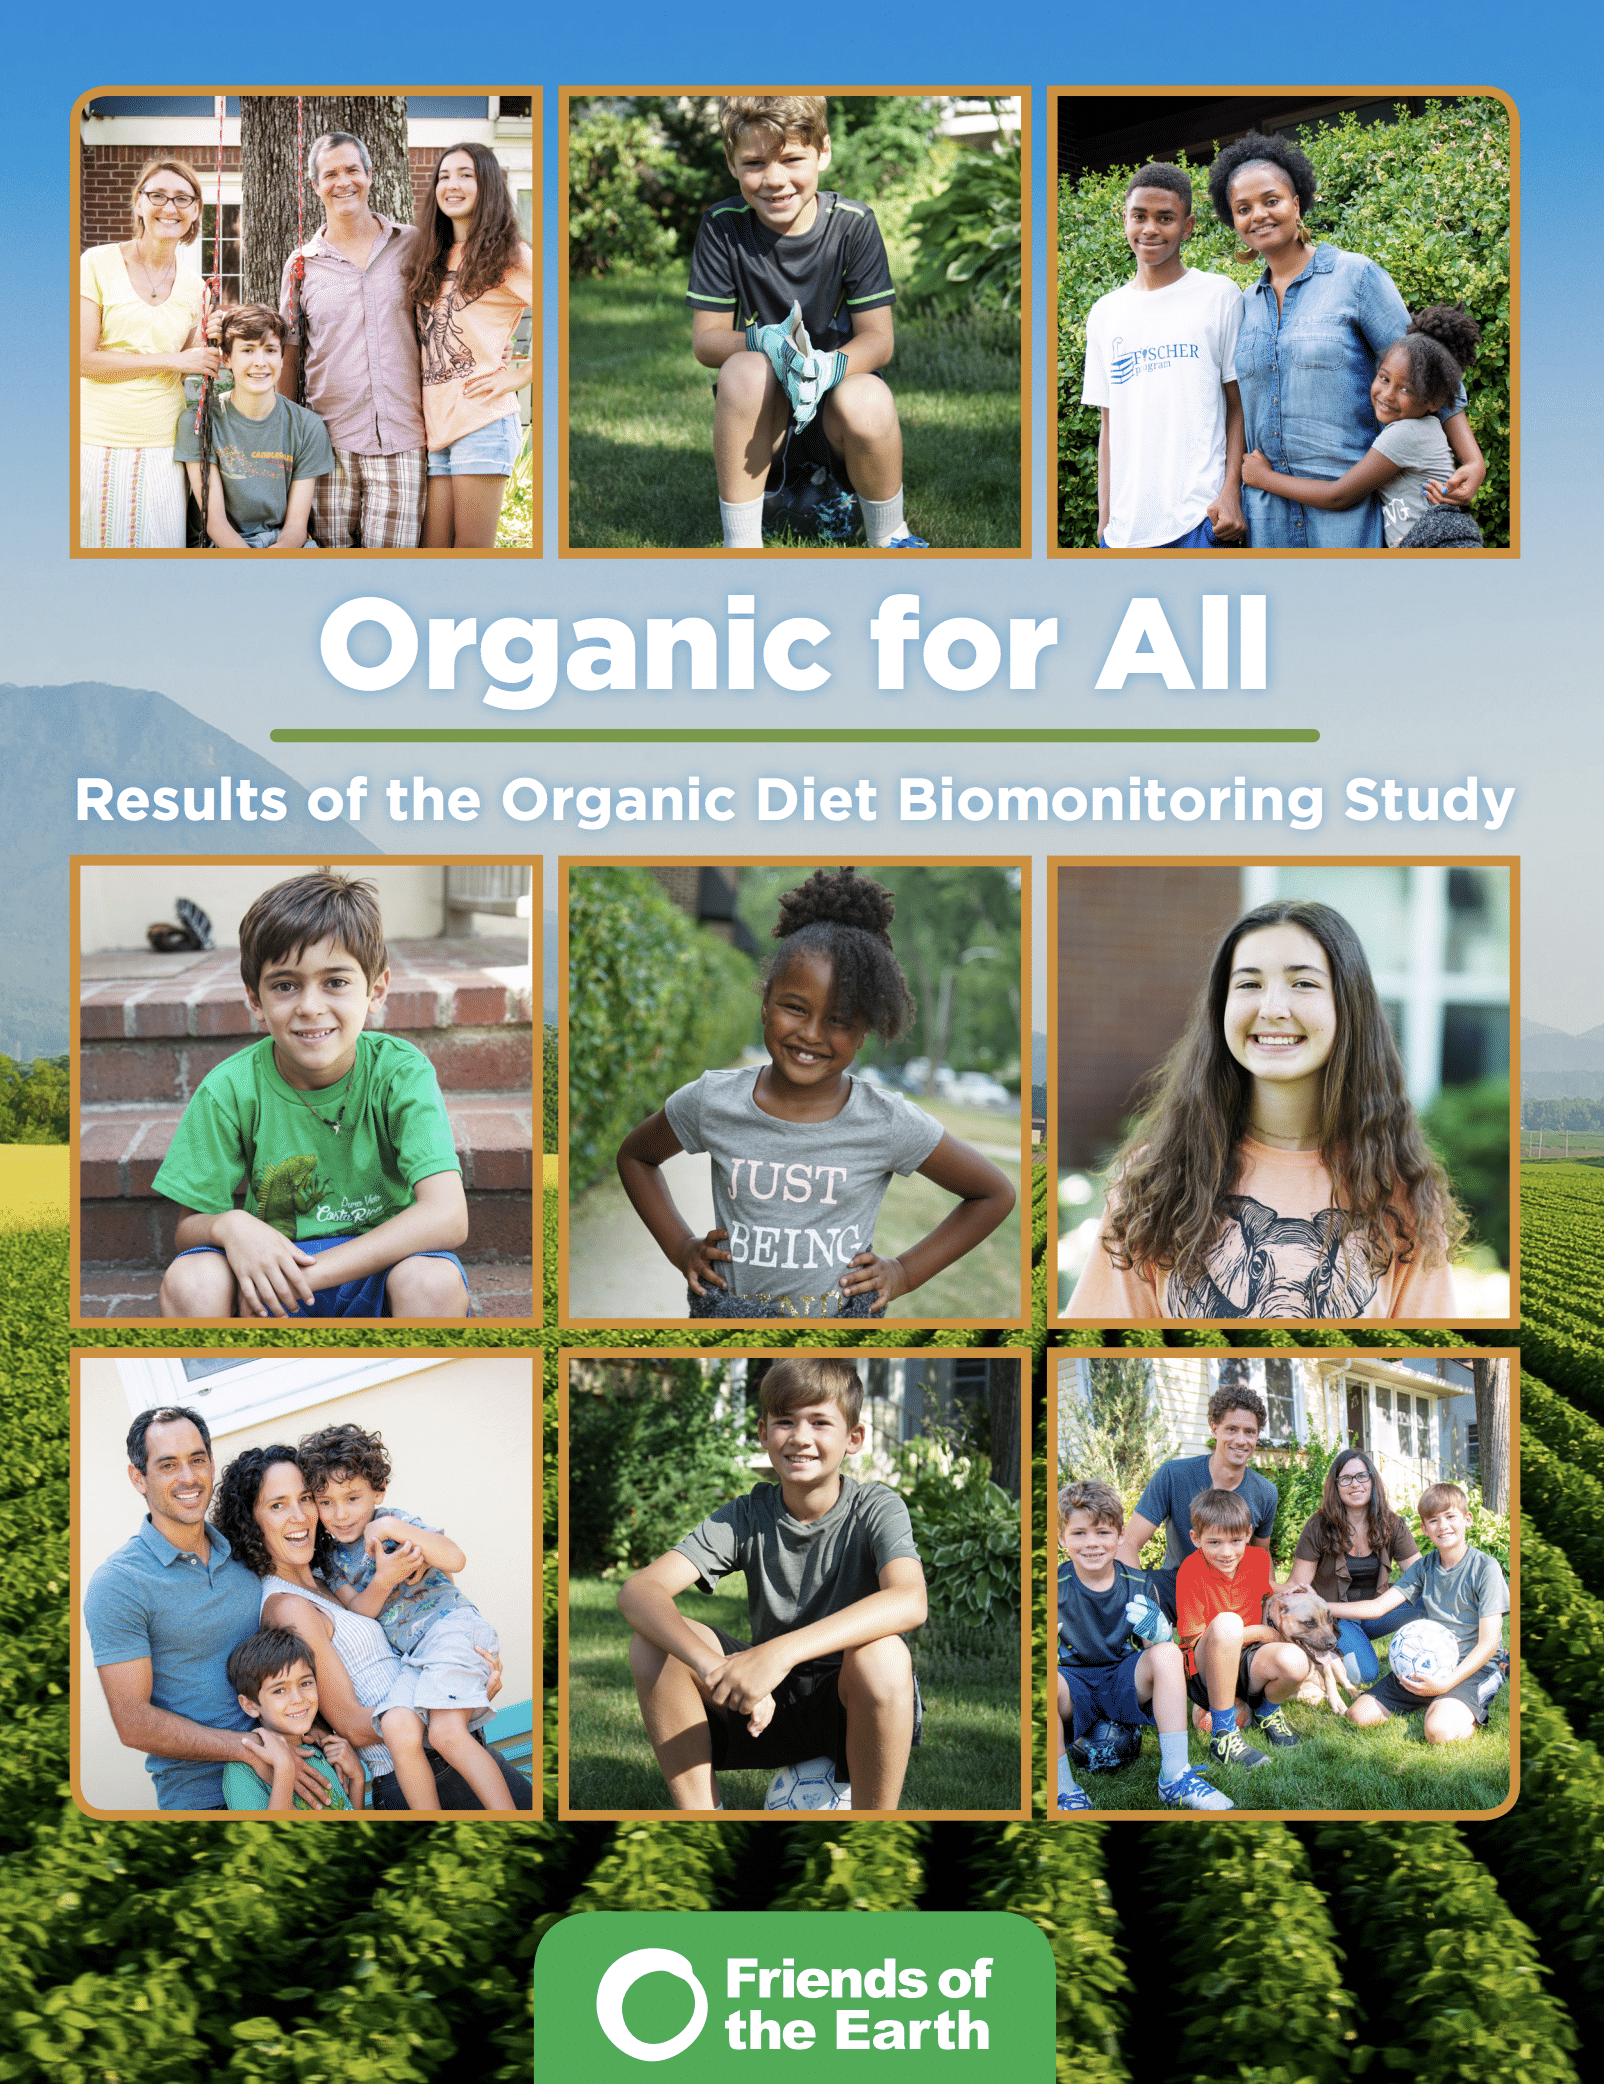 Organic for All: Results of the Organic Diet Biomonitoring Study